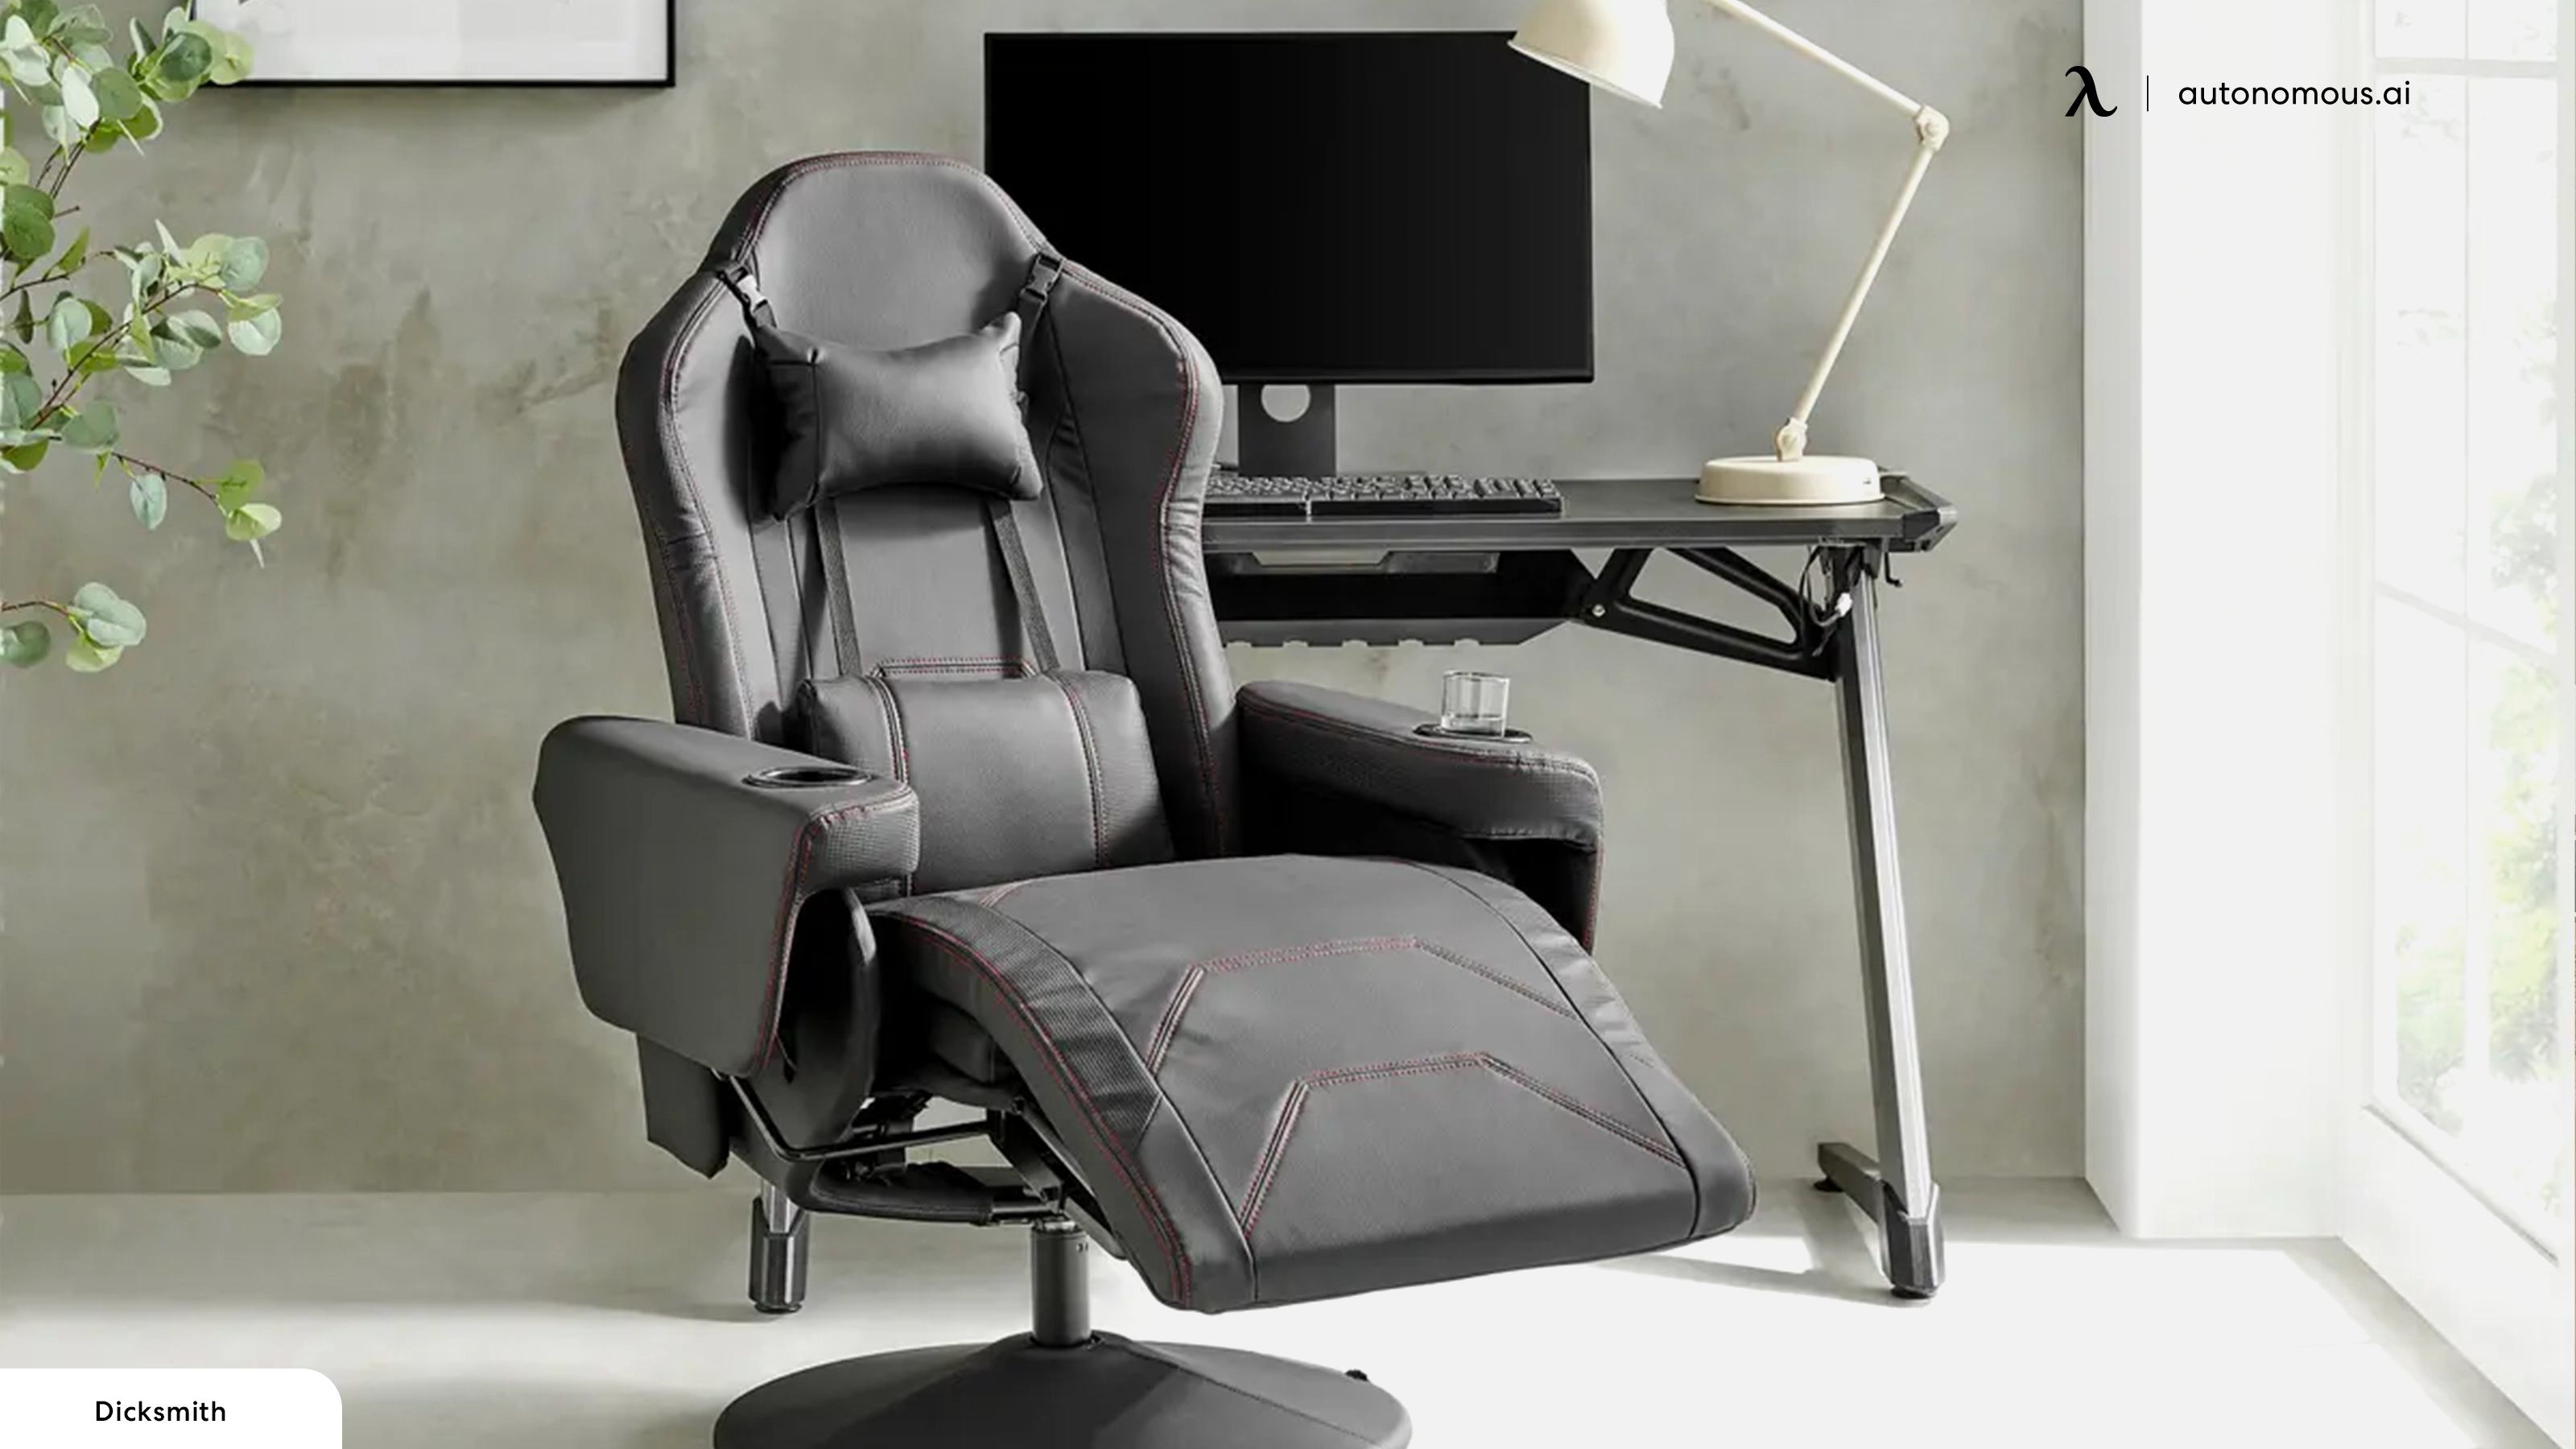 The Multi-Purpose Benefits of a Recliner Gaming Chair